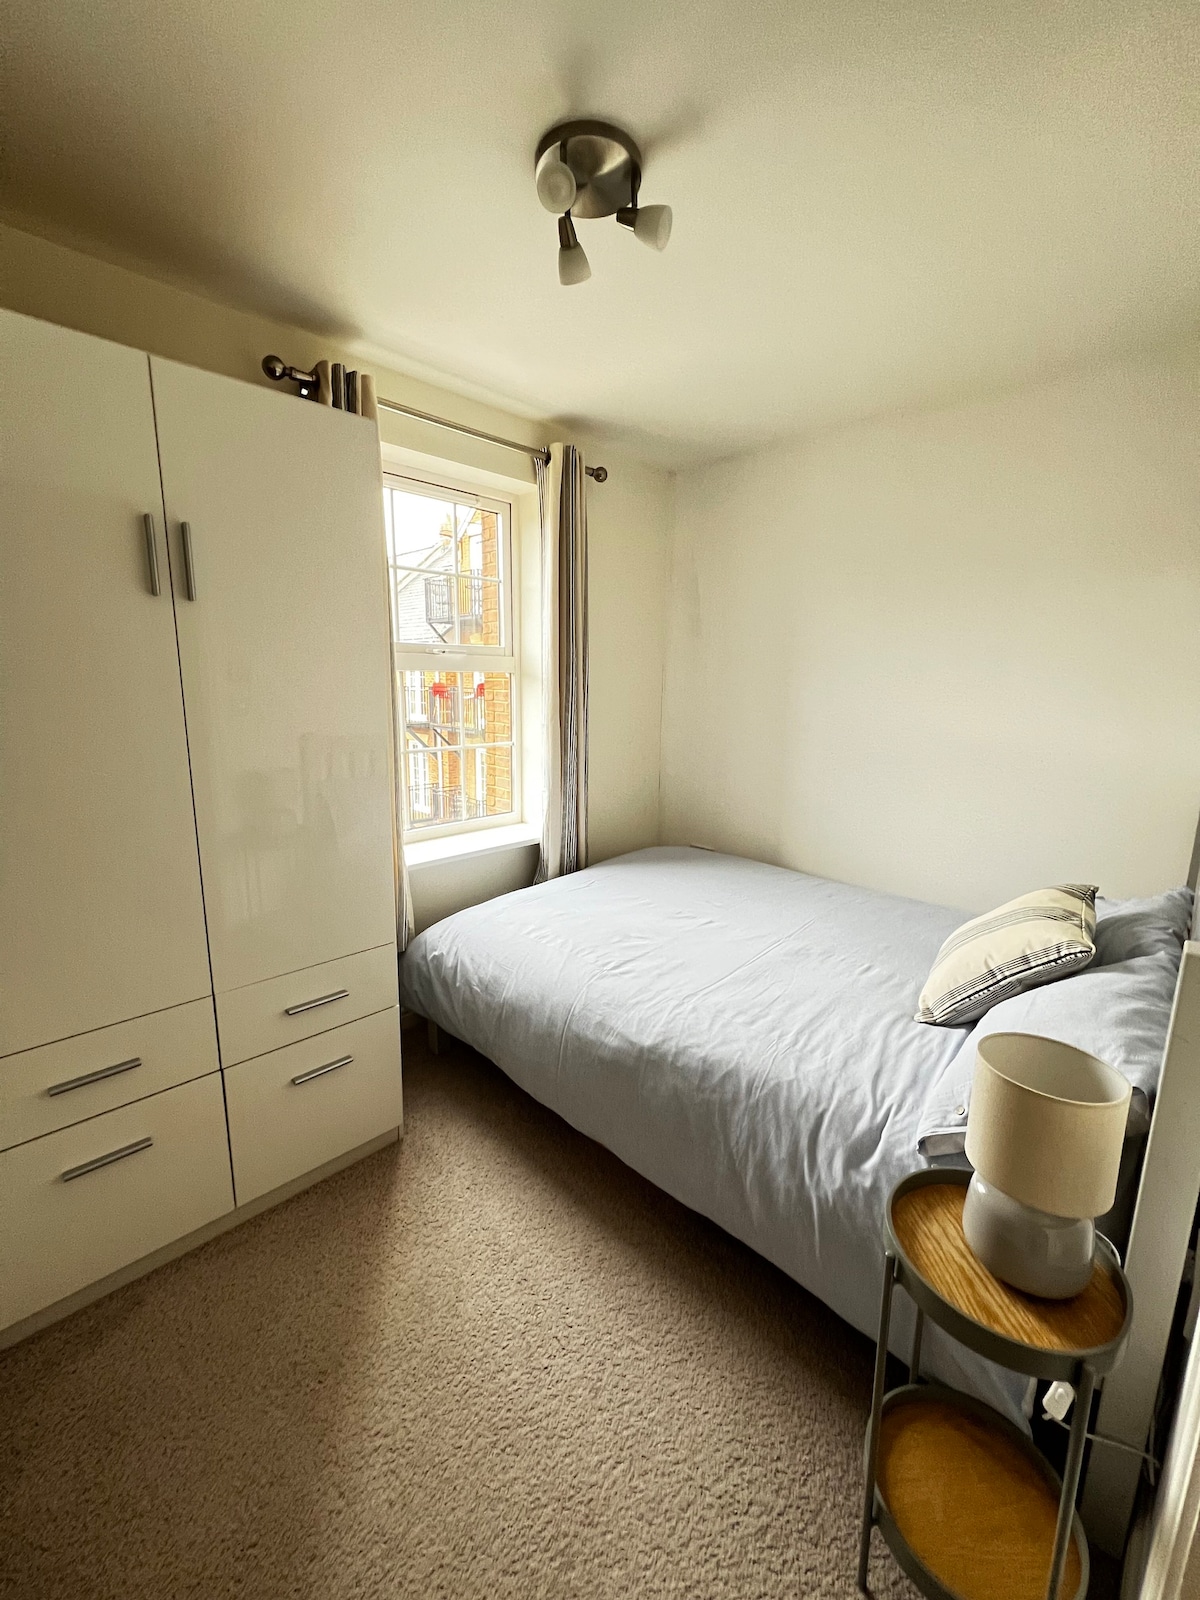 Double room within family home in town centre.